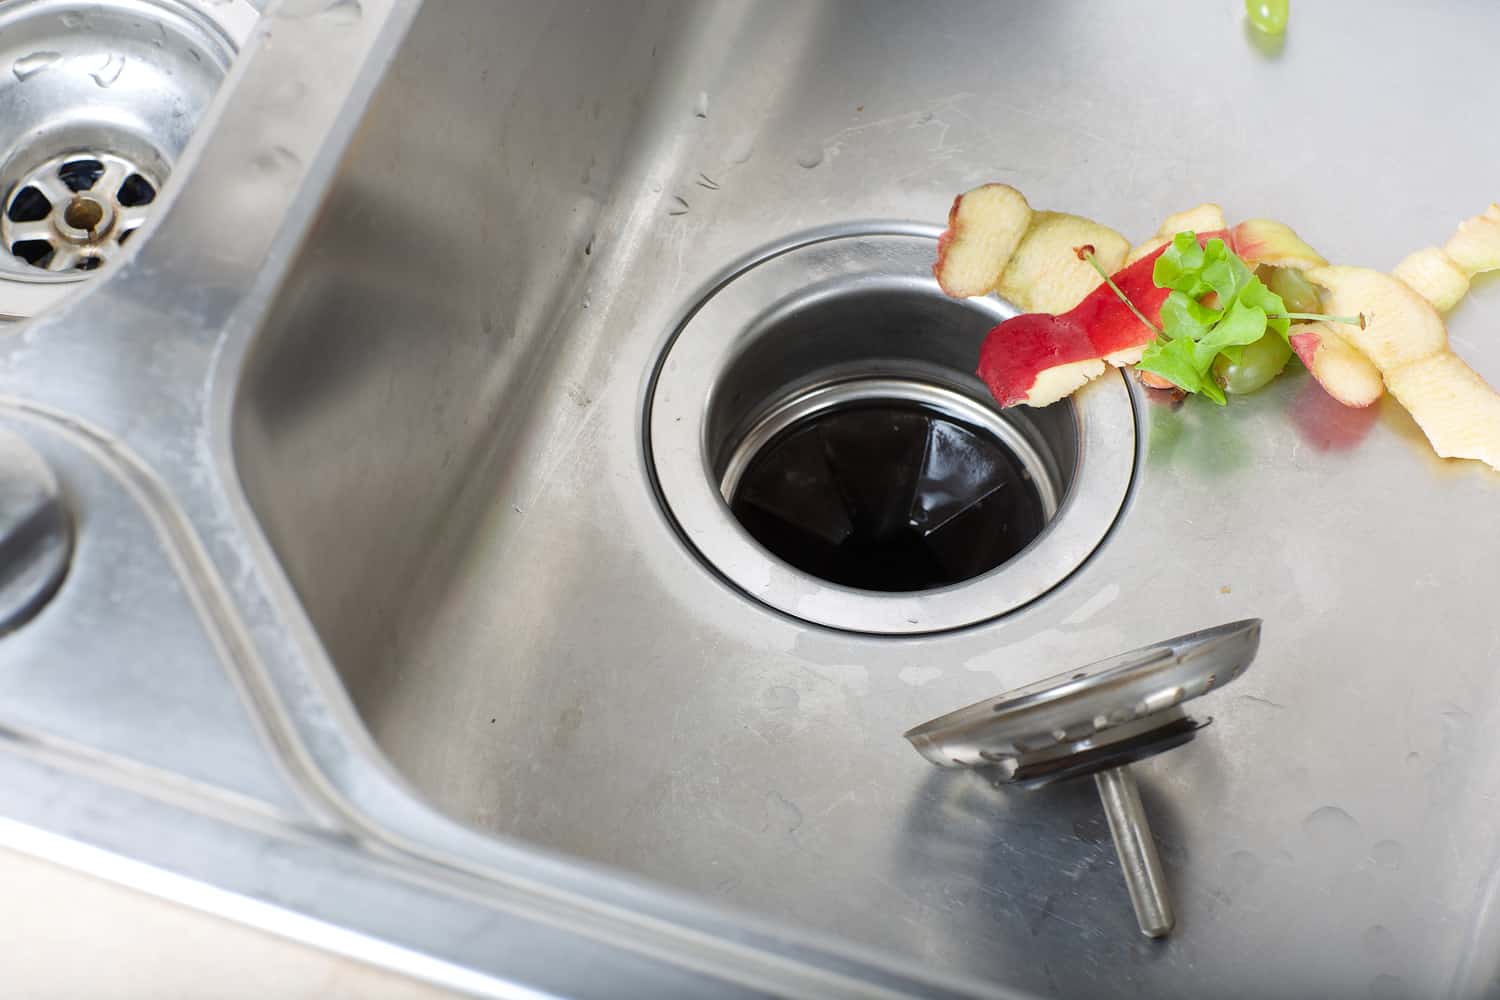 Food waste left in a sink